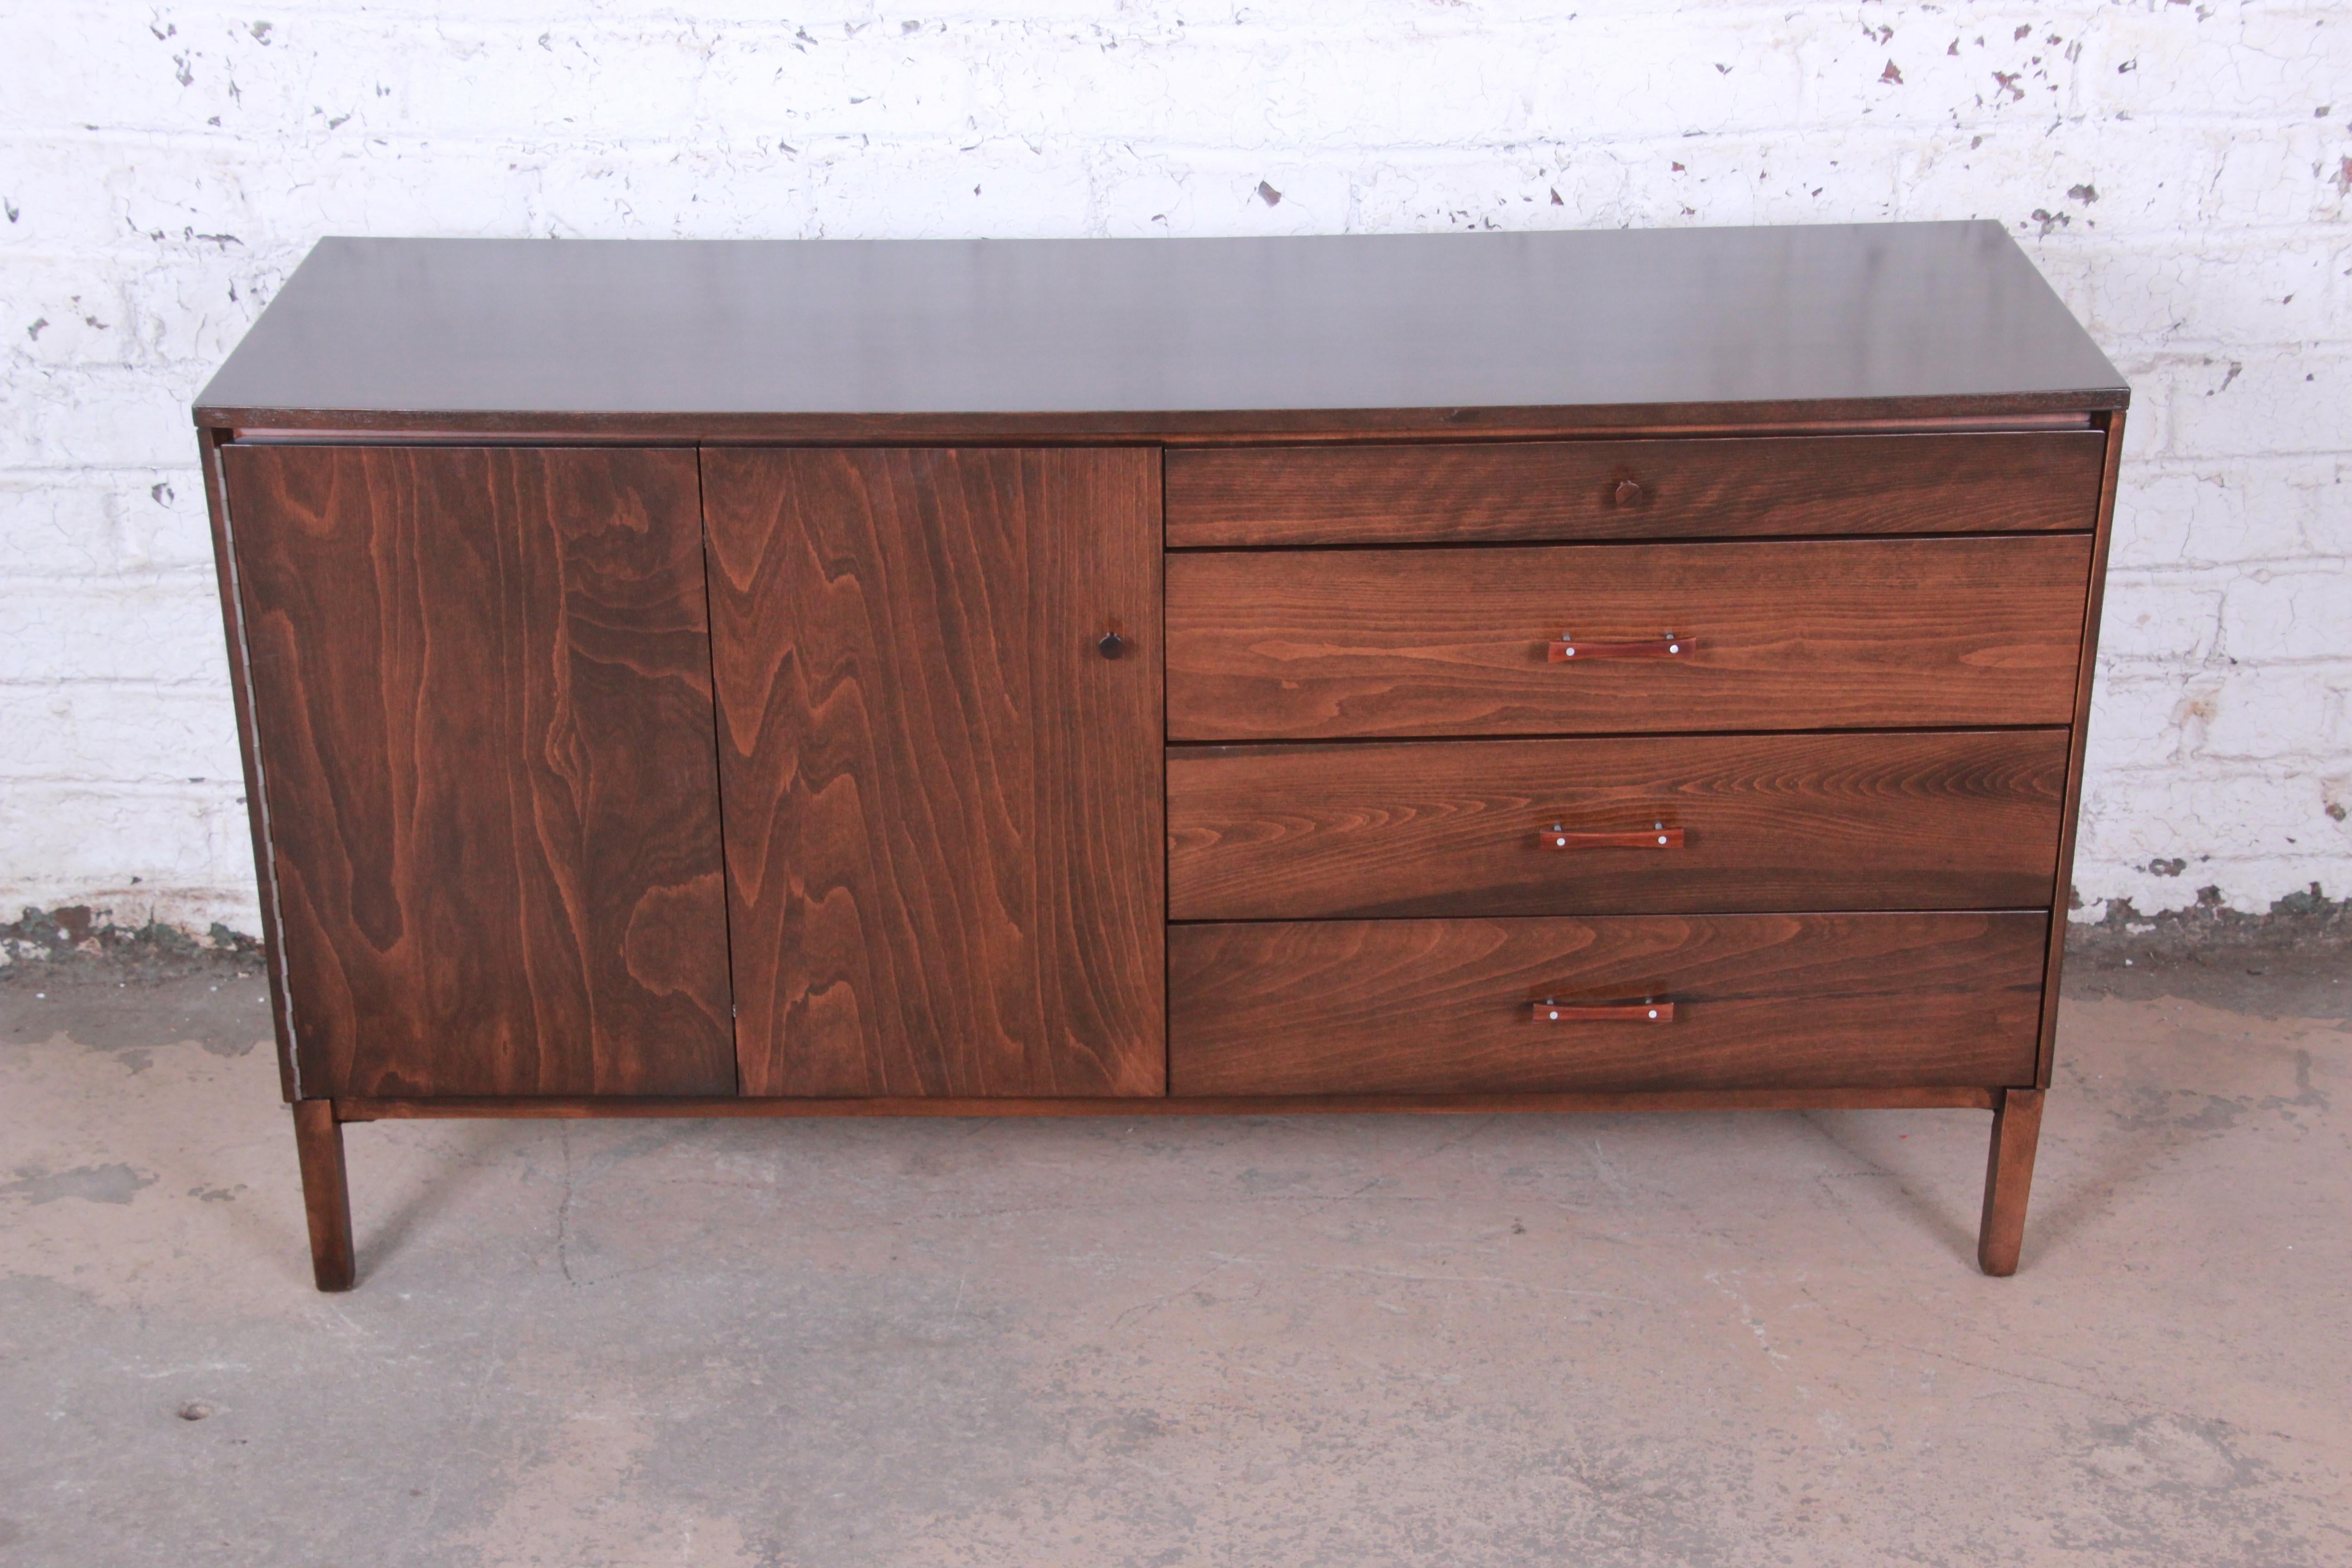 A rare and stunning Perimeter Group credenza by Paul McCobb. The credenza is newly refinished with rich stunning birch wood grain. The left side of the piece is a bi-fold door that opens up to an adjustable shelf. The right side has four drawers